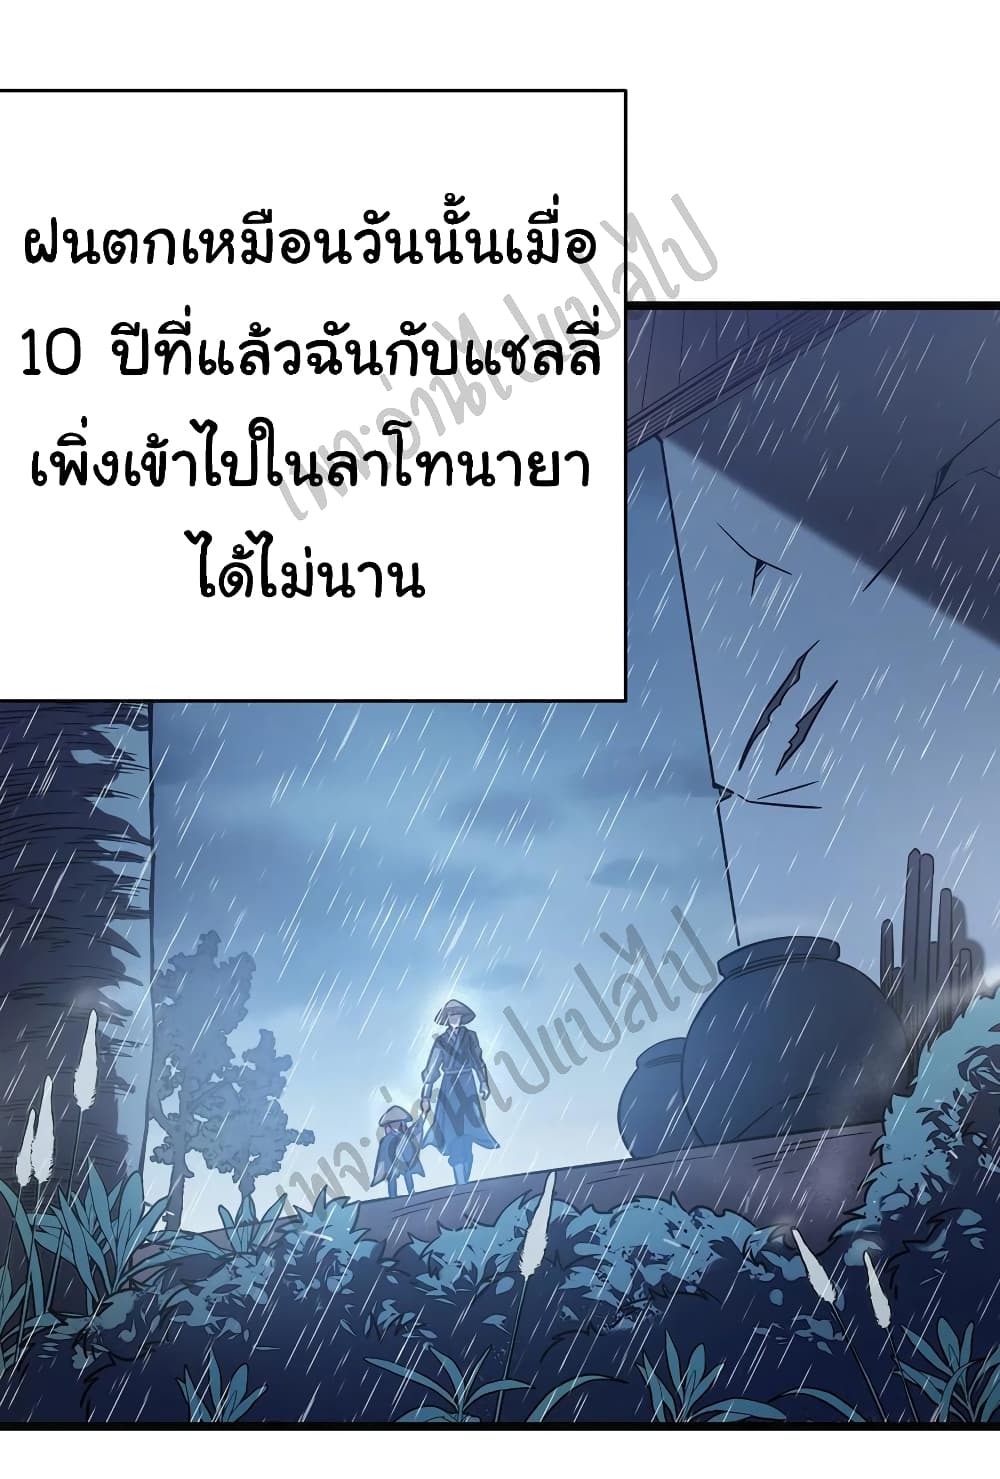 I Killed The Gods in Another World14 (2)